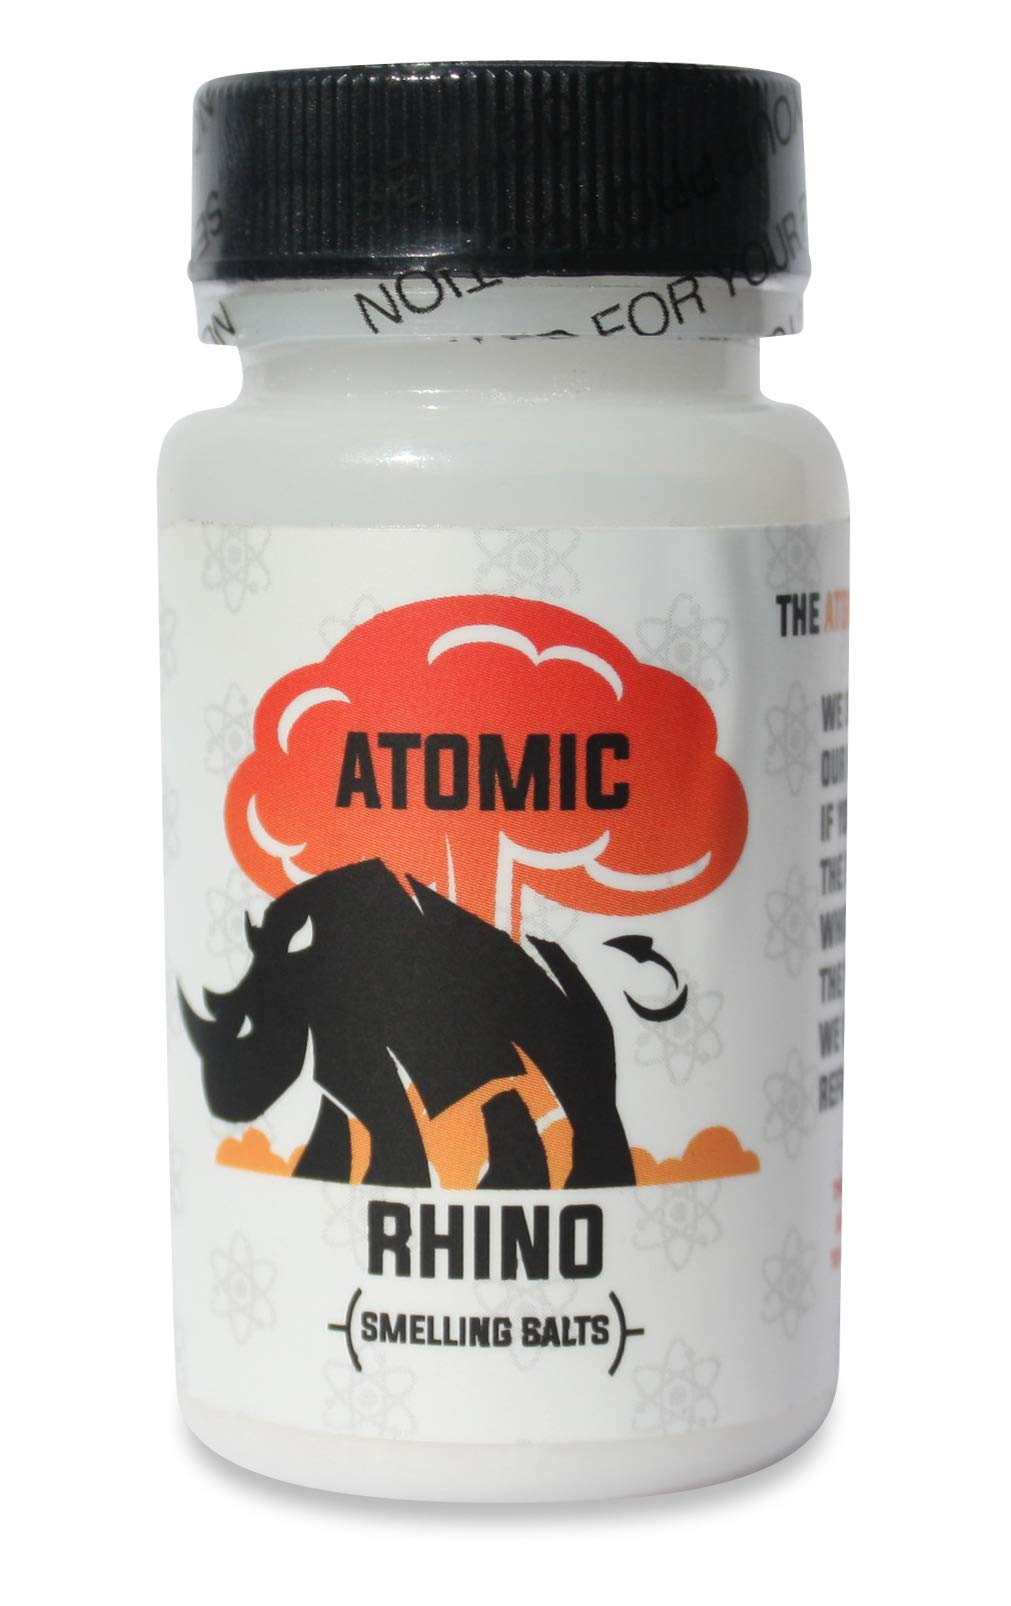 Atomic Rhino Smelling Salts for Athletes 100’s of Uses per Bottle Explosive Workout Sniffing Salts for Massive Energy Boost Just Add Water to Activate Pre Workout